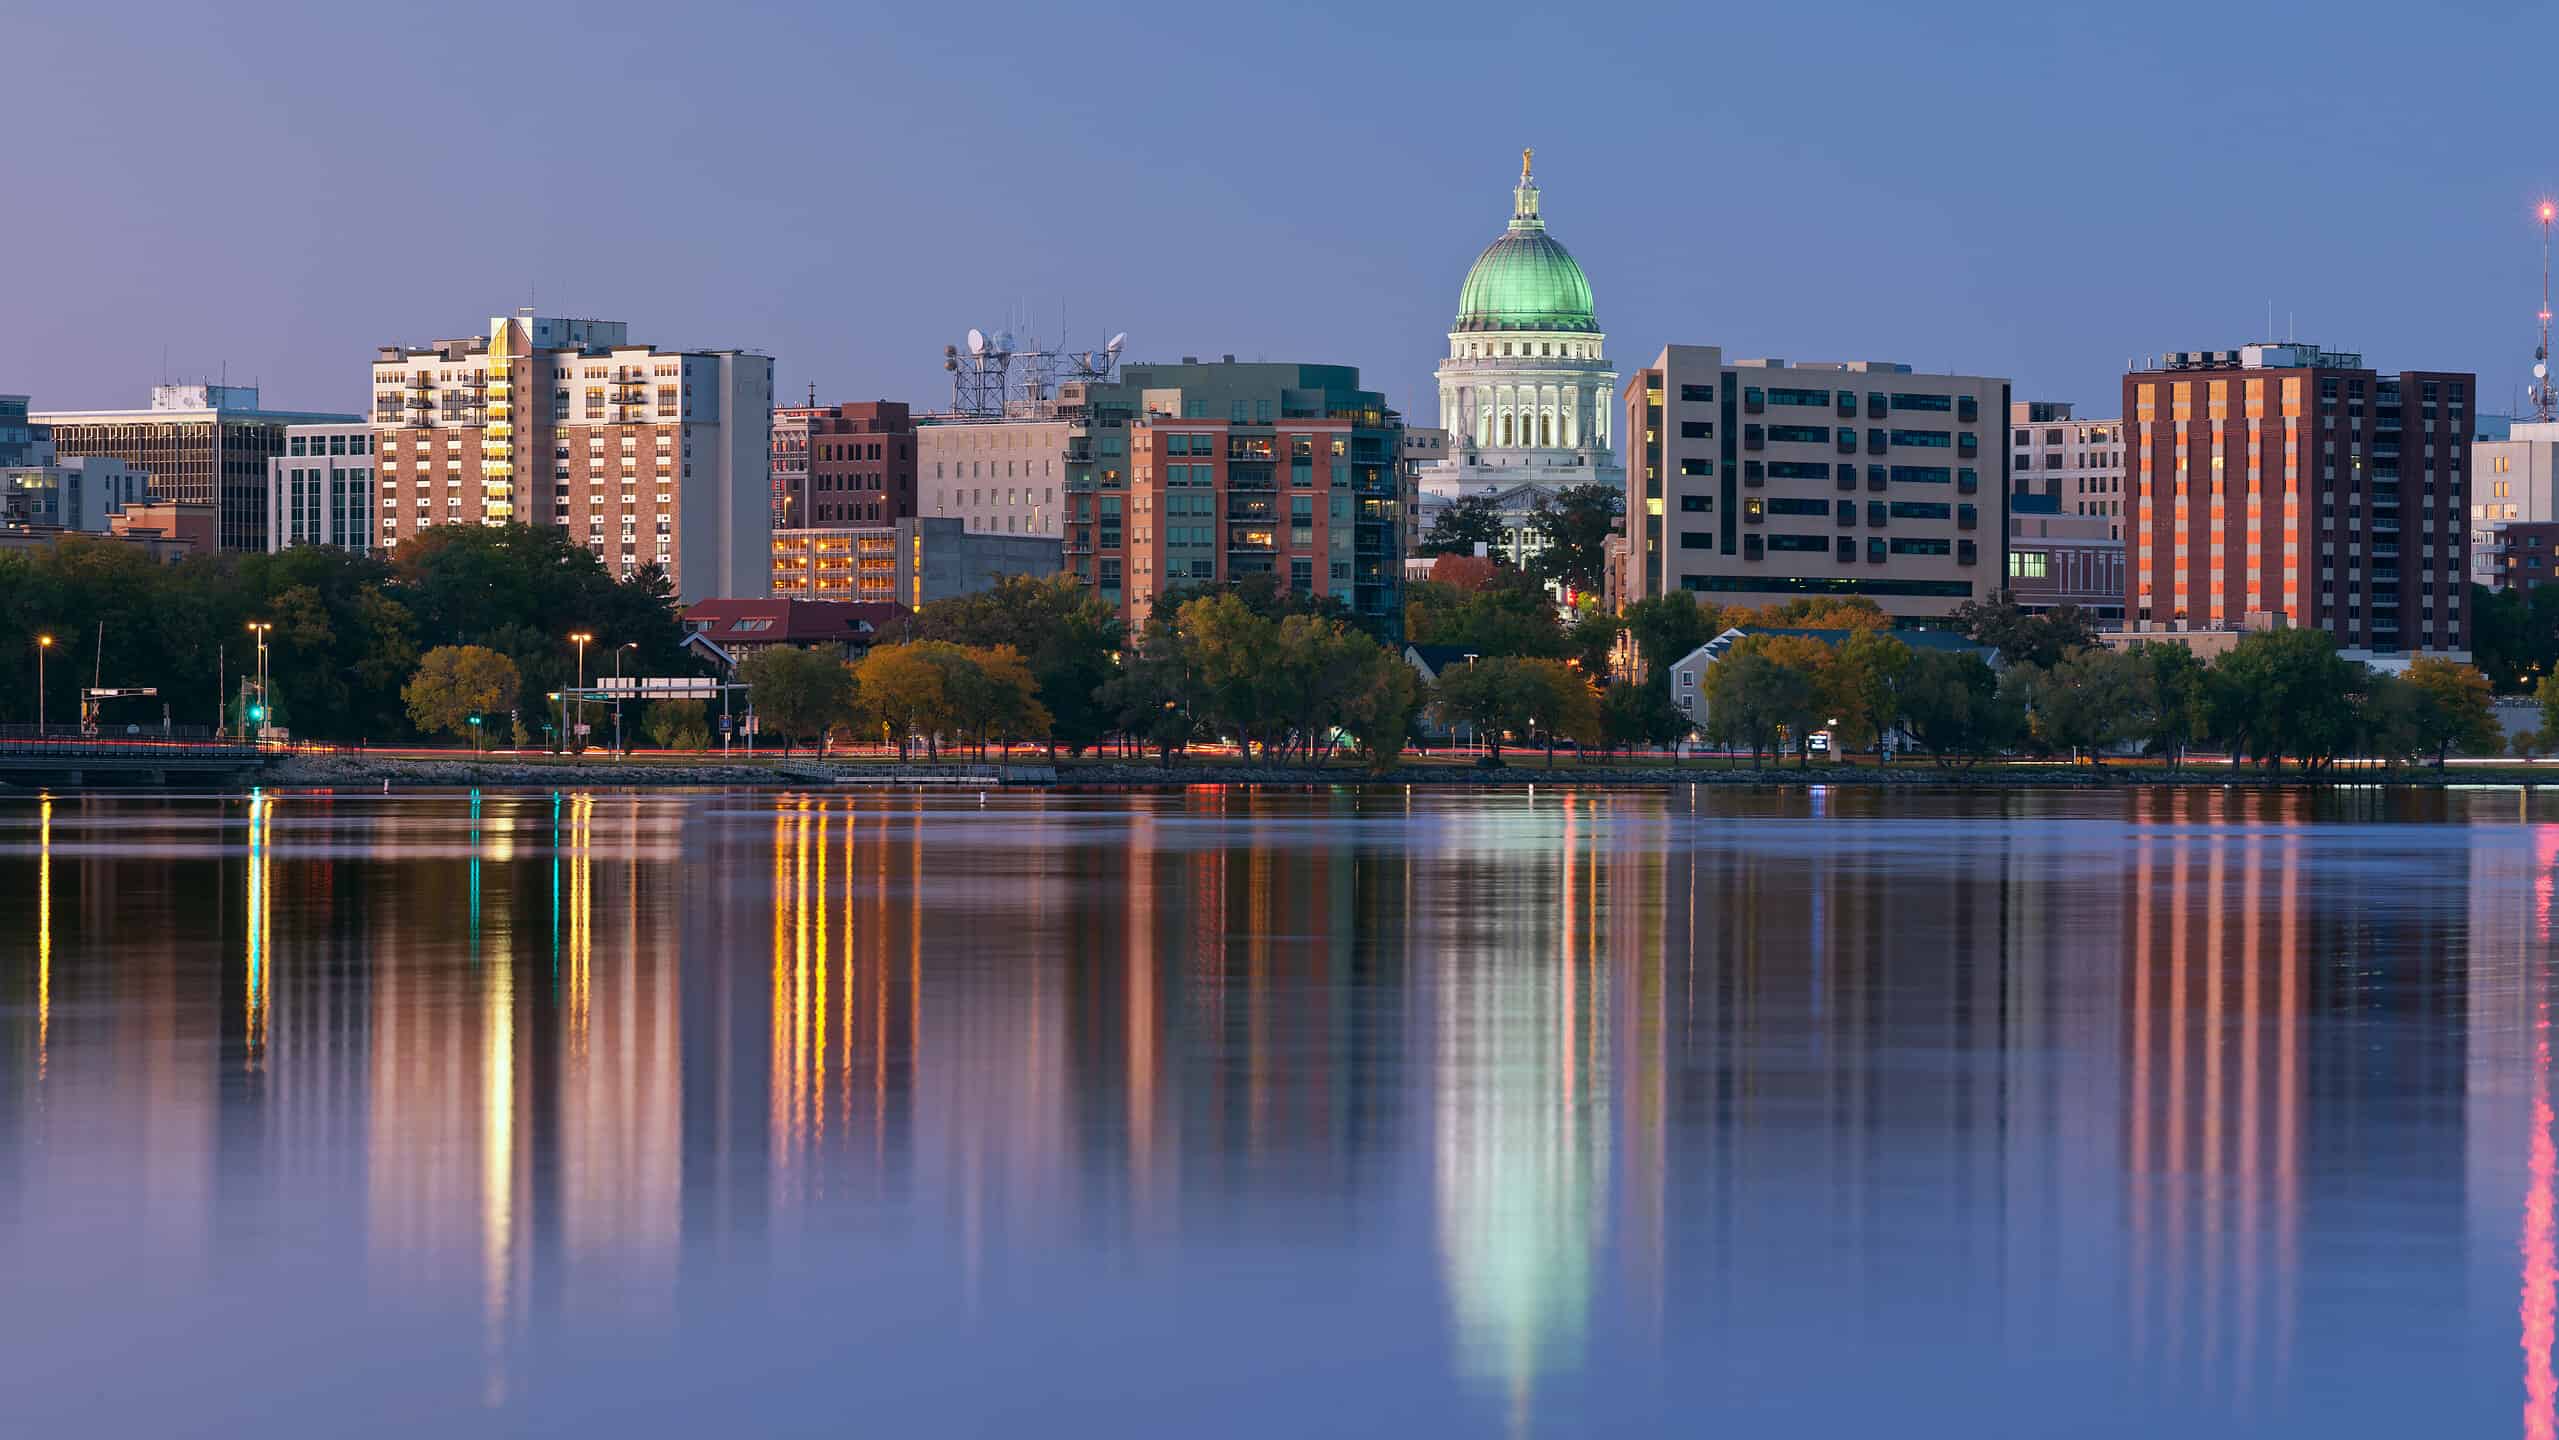 Panoramic image of Madison (Wisconsin) at twilight. This is stitched composite of 5 vertical images.